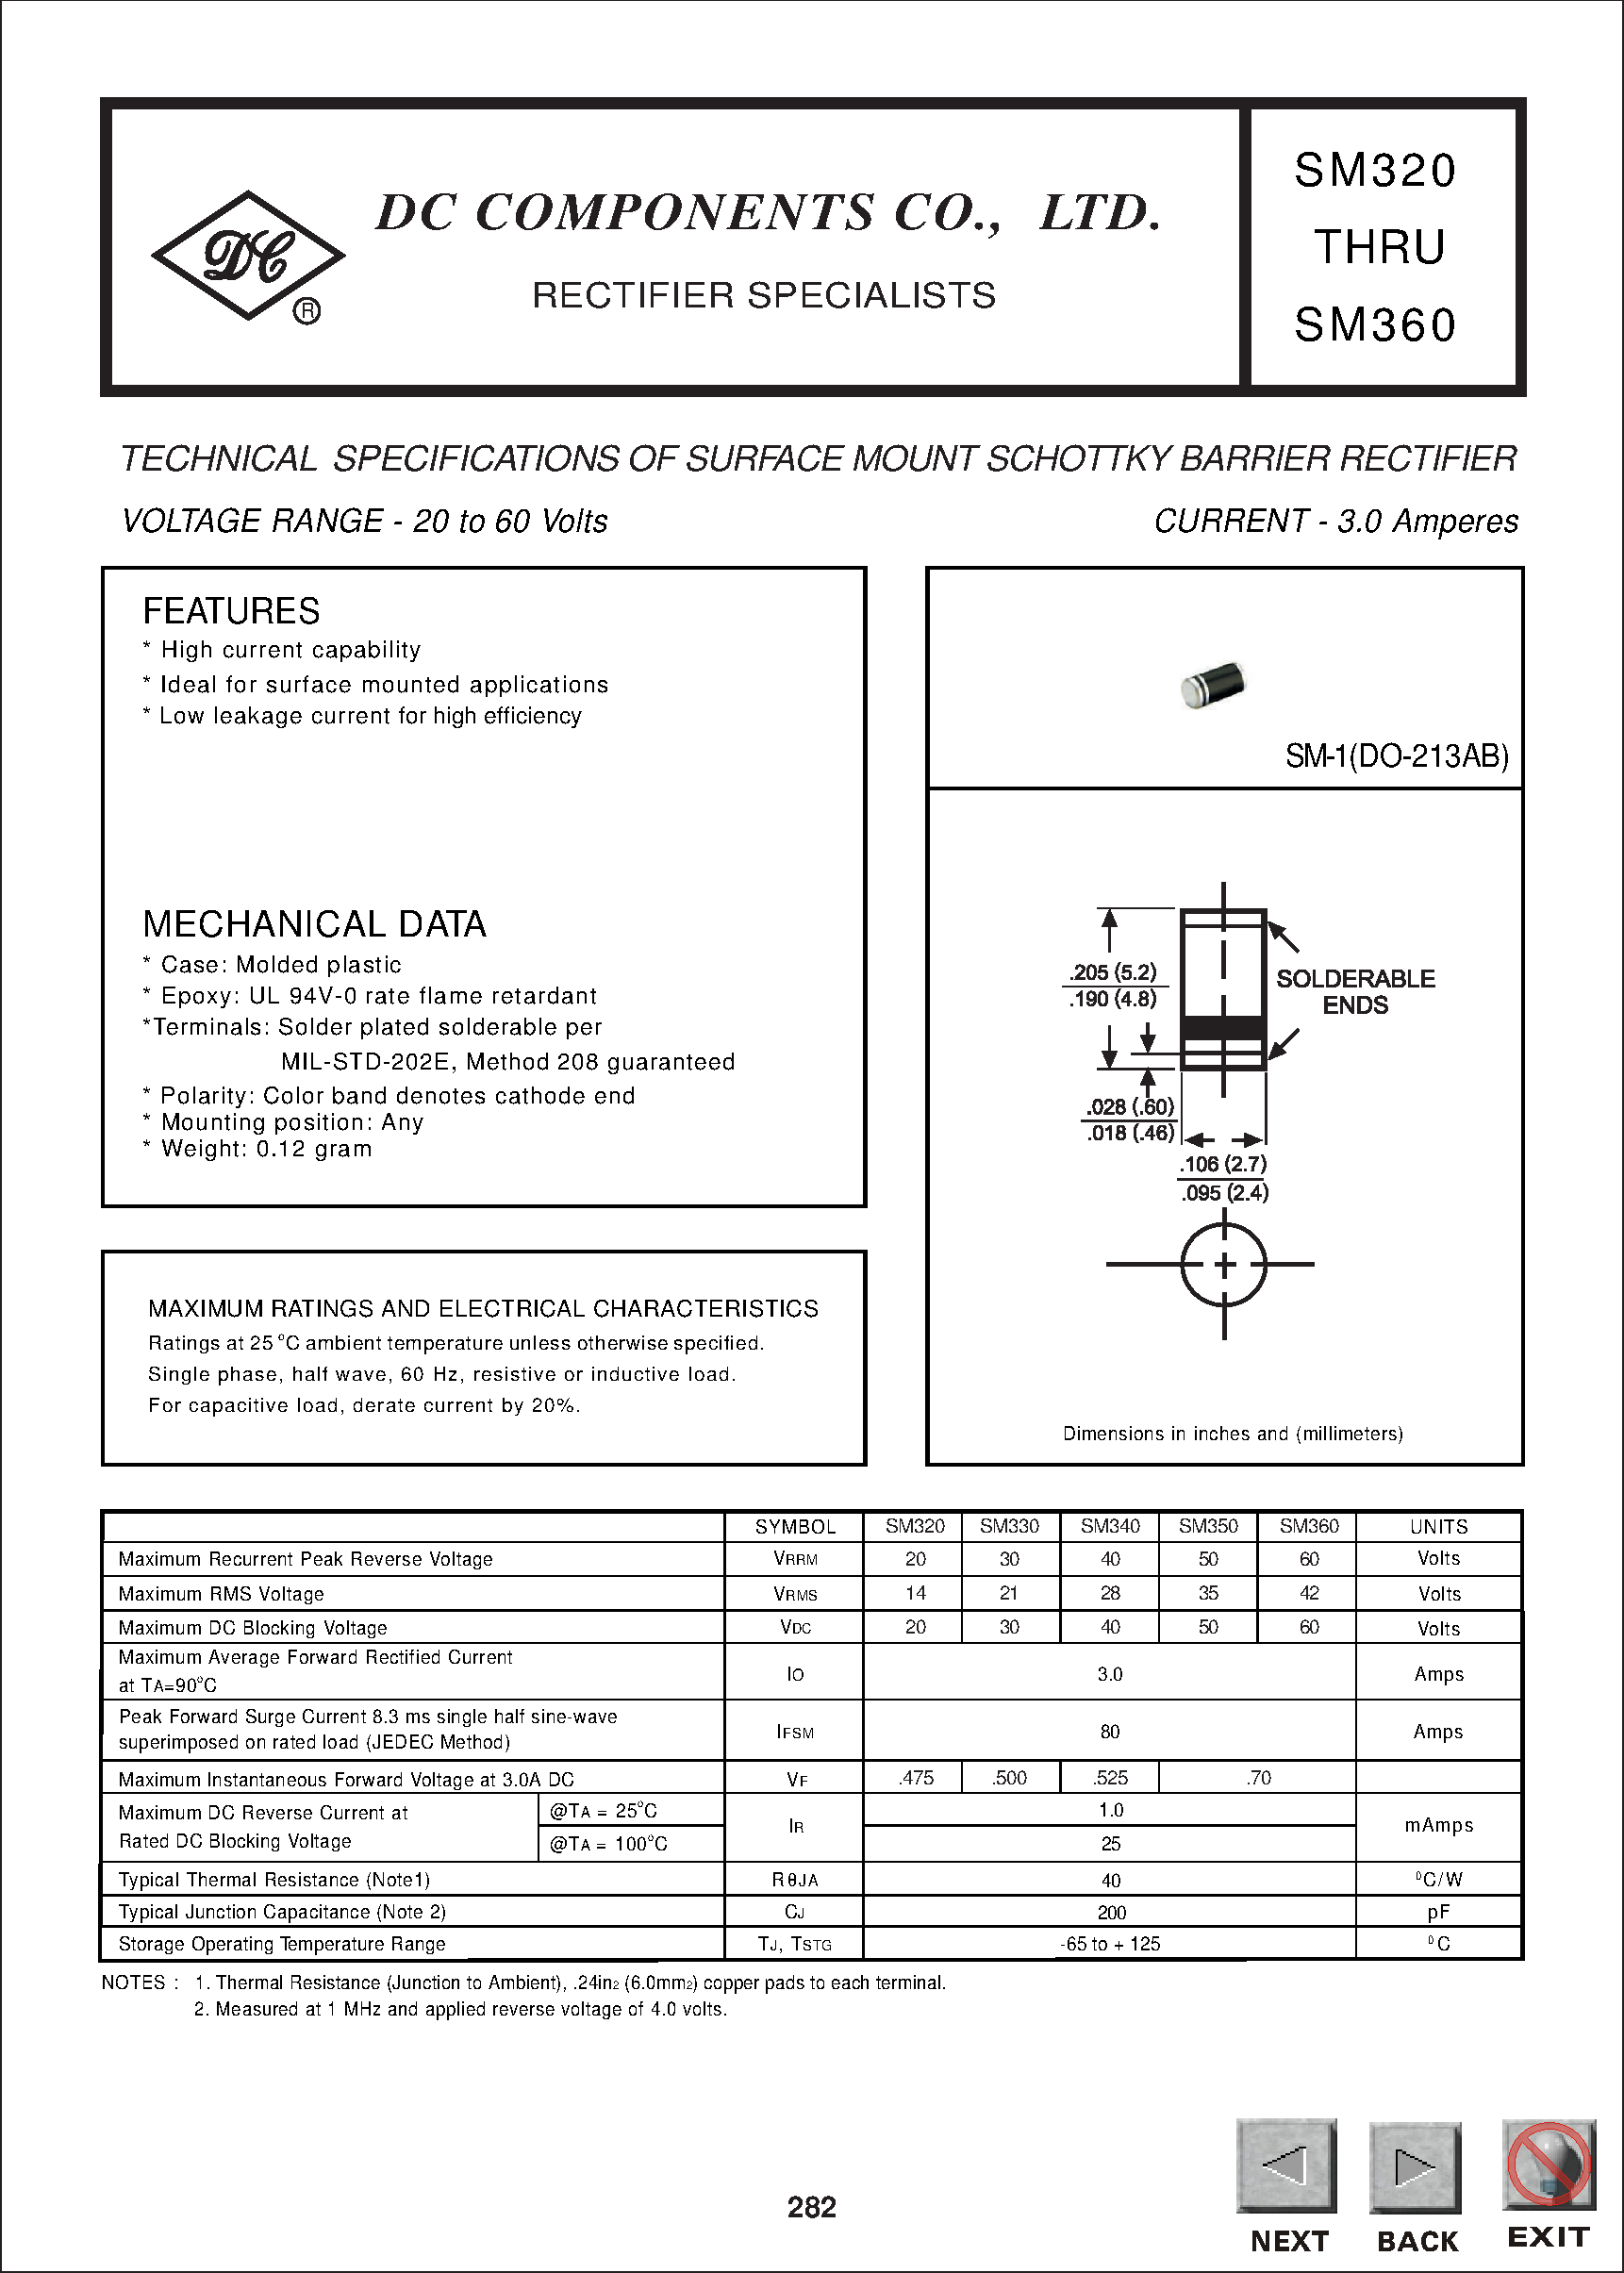 Даташит SM320 - TECHNICAL SPECIFICATIONS OF SURFACE MOUNT SCHOTTKY BARRIER RECTIFIER страница 1